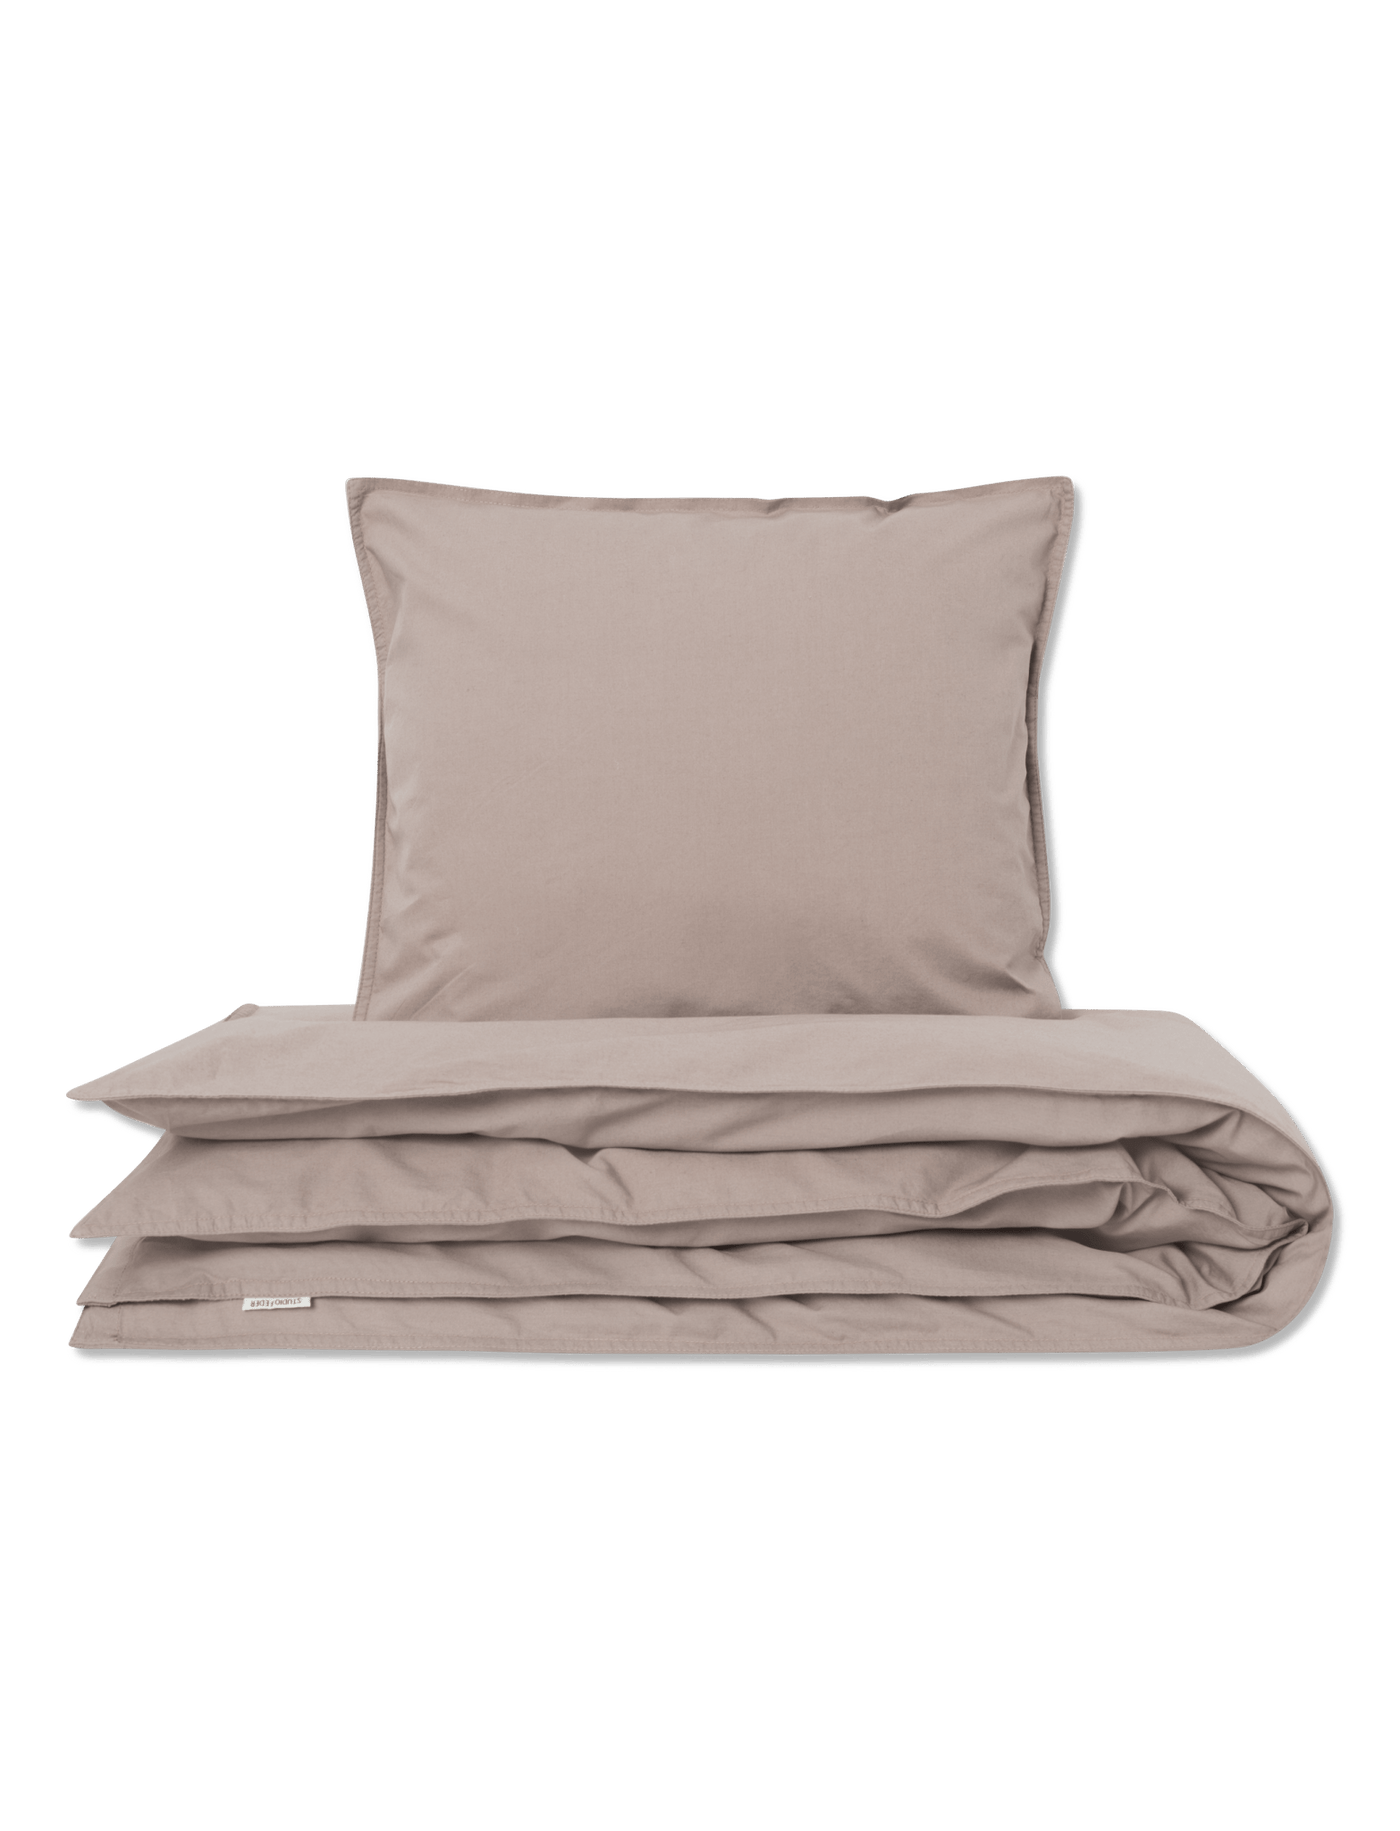 Adult Bedding Xl - Taupe